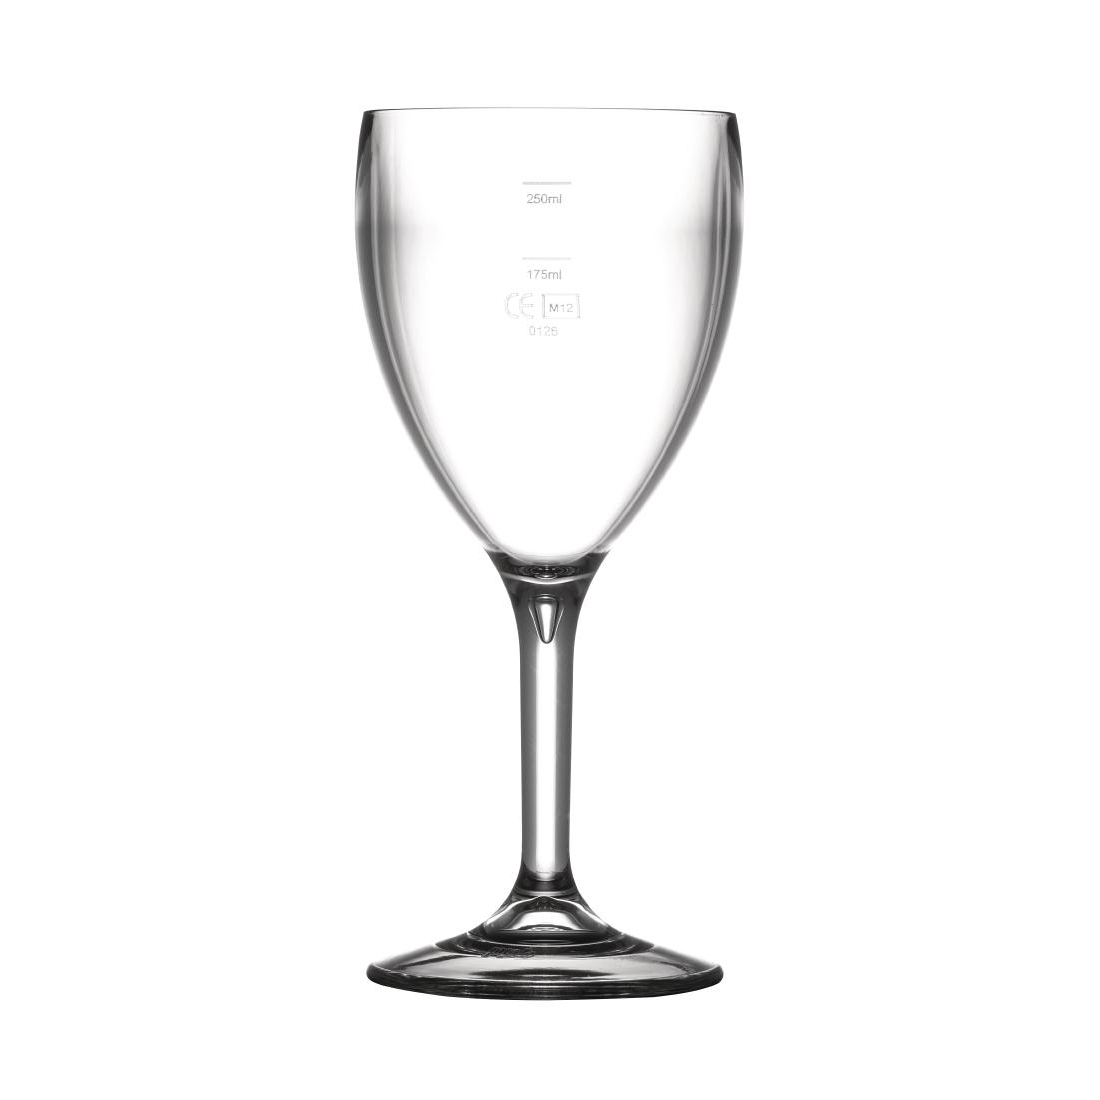 BBP Polycarbonate Wine Glasses 310ml CE Marked at 175ml and 250ml